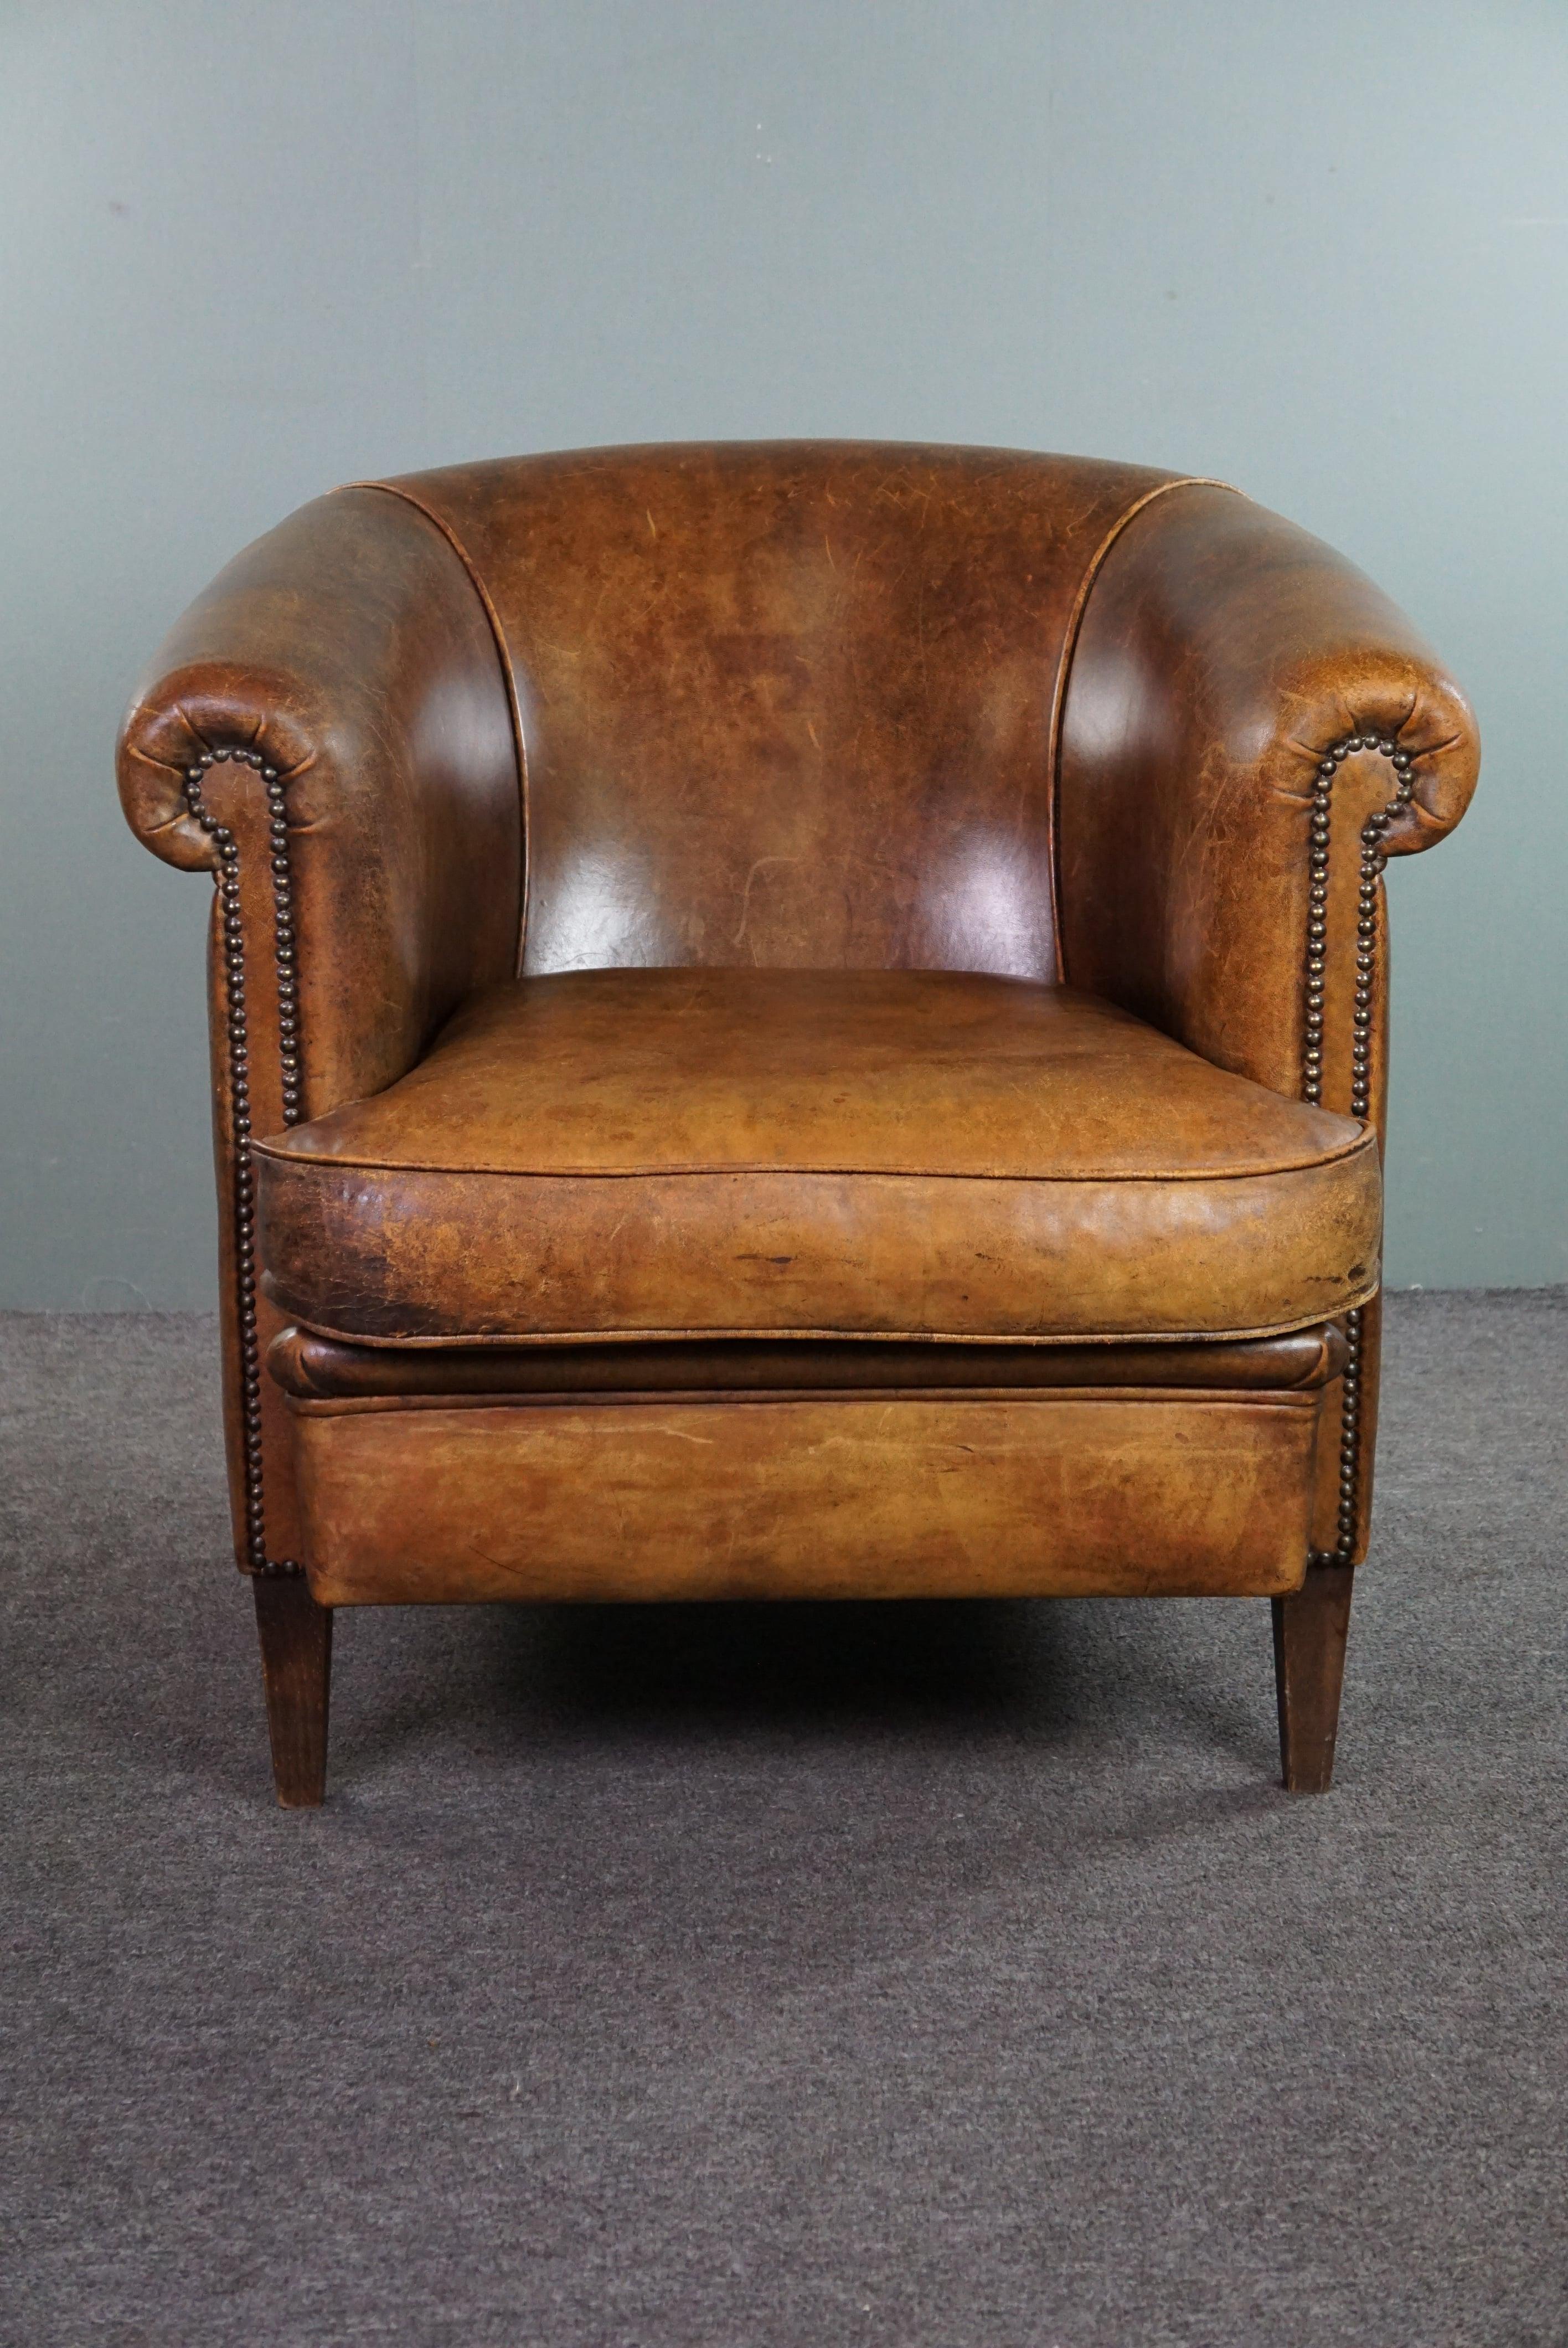 Offered is this rugged and inviting club armchair made of sheep leather finished with decorative nails.

This club armchair is one that will invite you and your guests to come and sit. You'll experience the comfort when seated, and it's a sight to